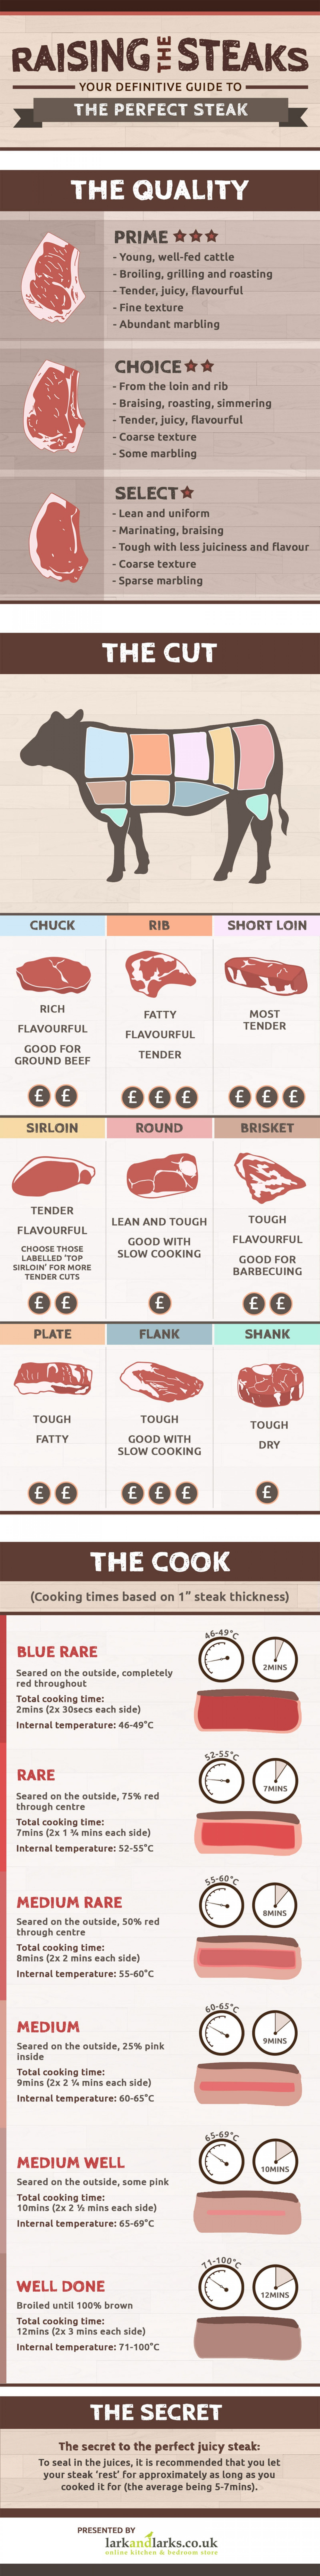 raising-the-steaks--your-definitive-guide-to-the-perfect-steak_553a5a5ab8e7e_w1500